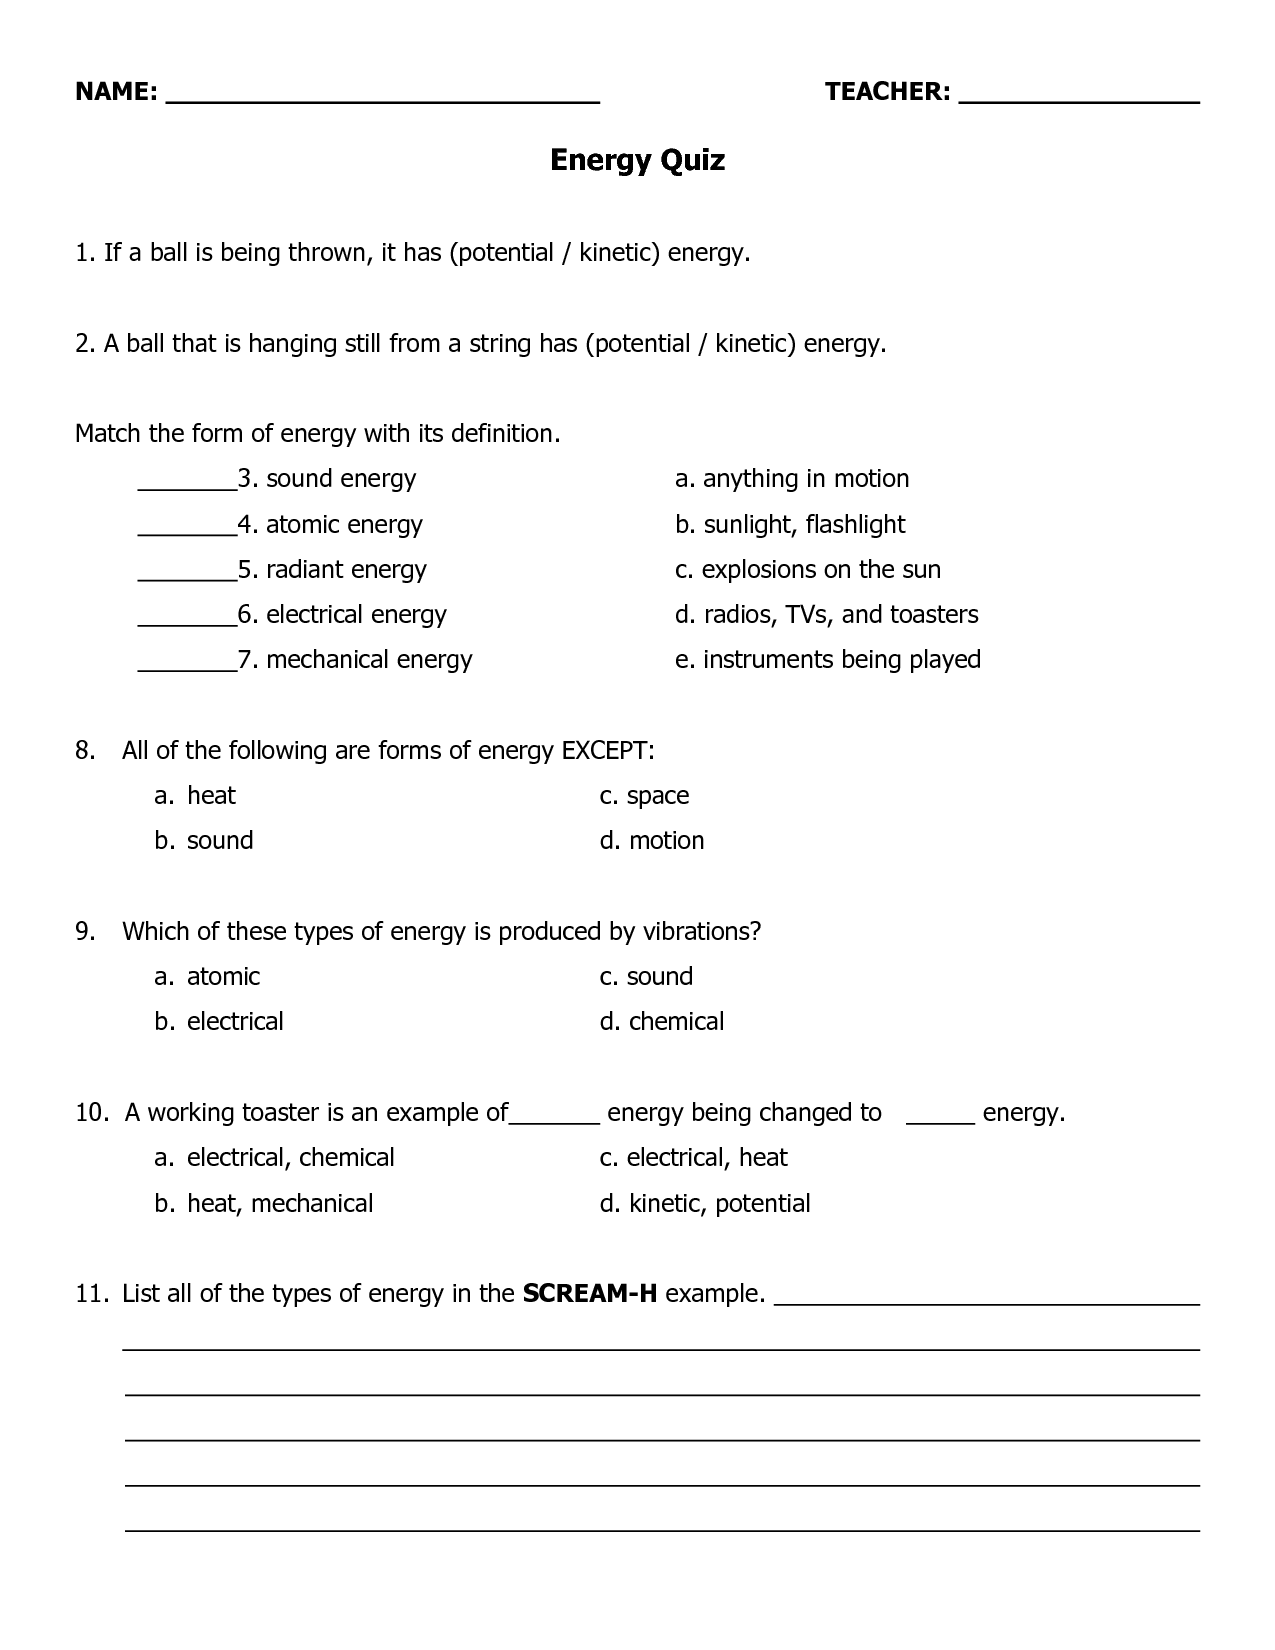 Different Forms of Energy Worksheets